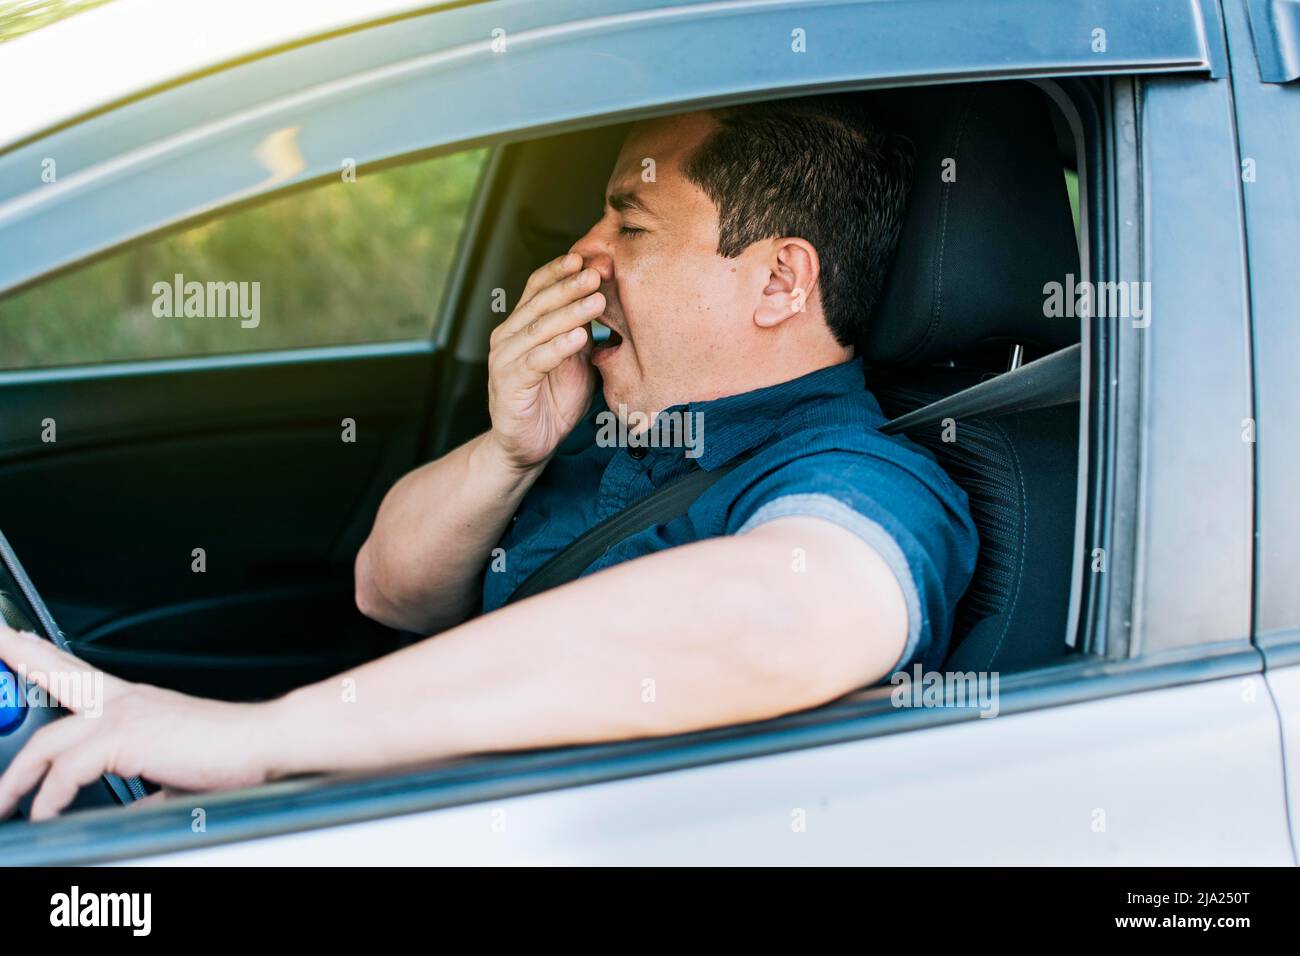 Tired driver yawning, concept of man yawning while driving. A sleepy driver at the wheel, a tired person while driving Stock Photo